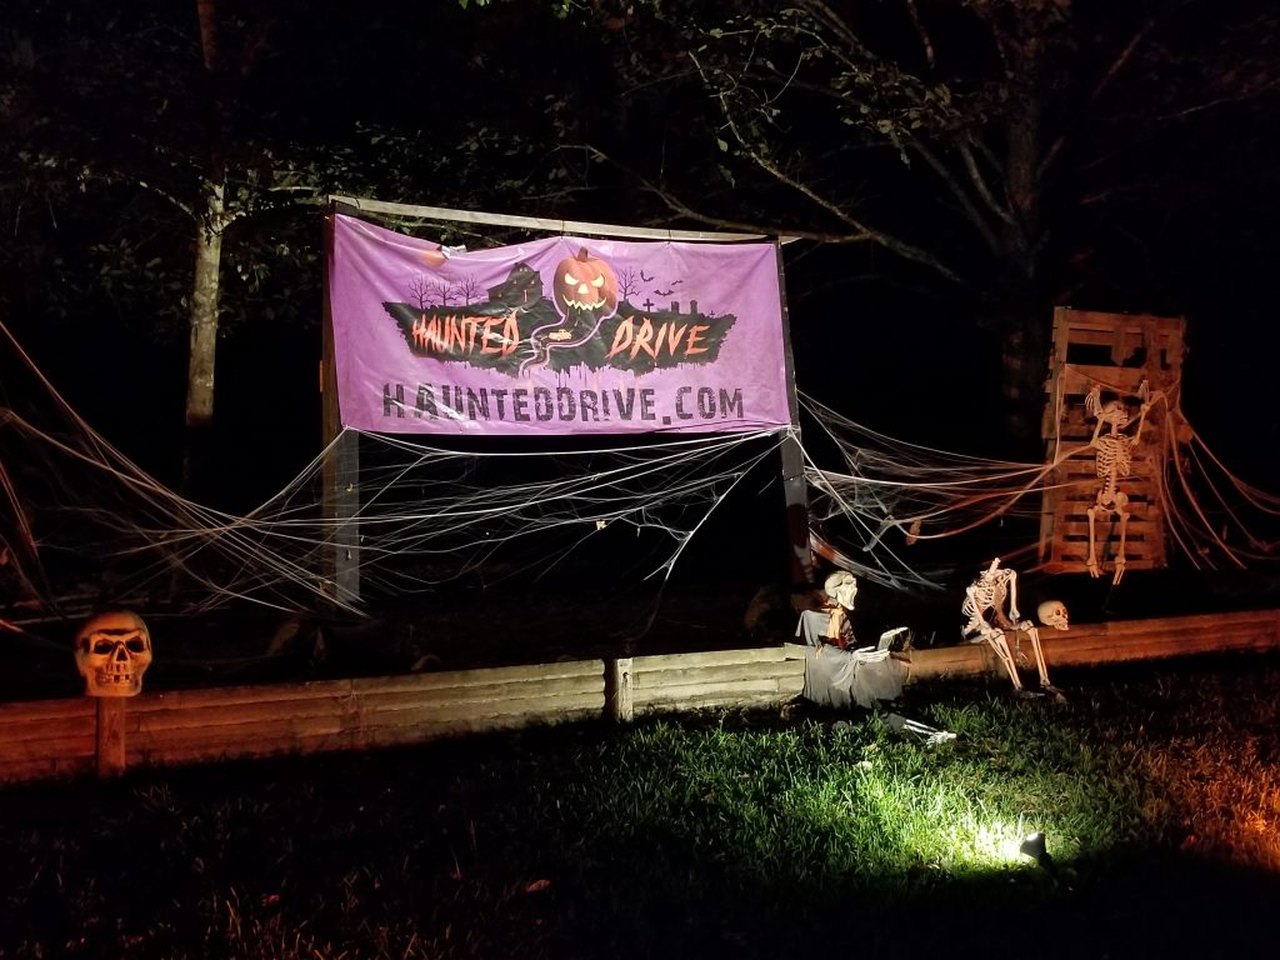 Visit Haunted Drive, A DriveThru Haunted House In Texas, This Halloween